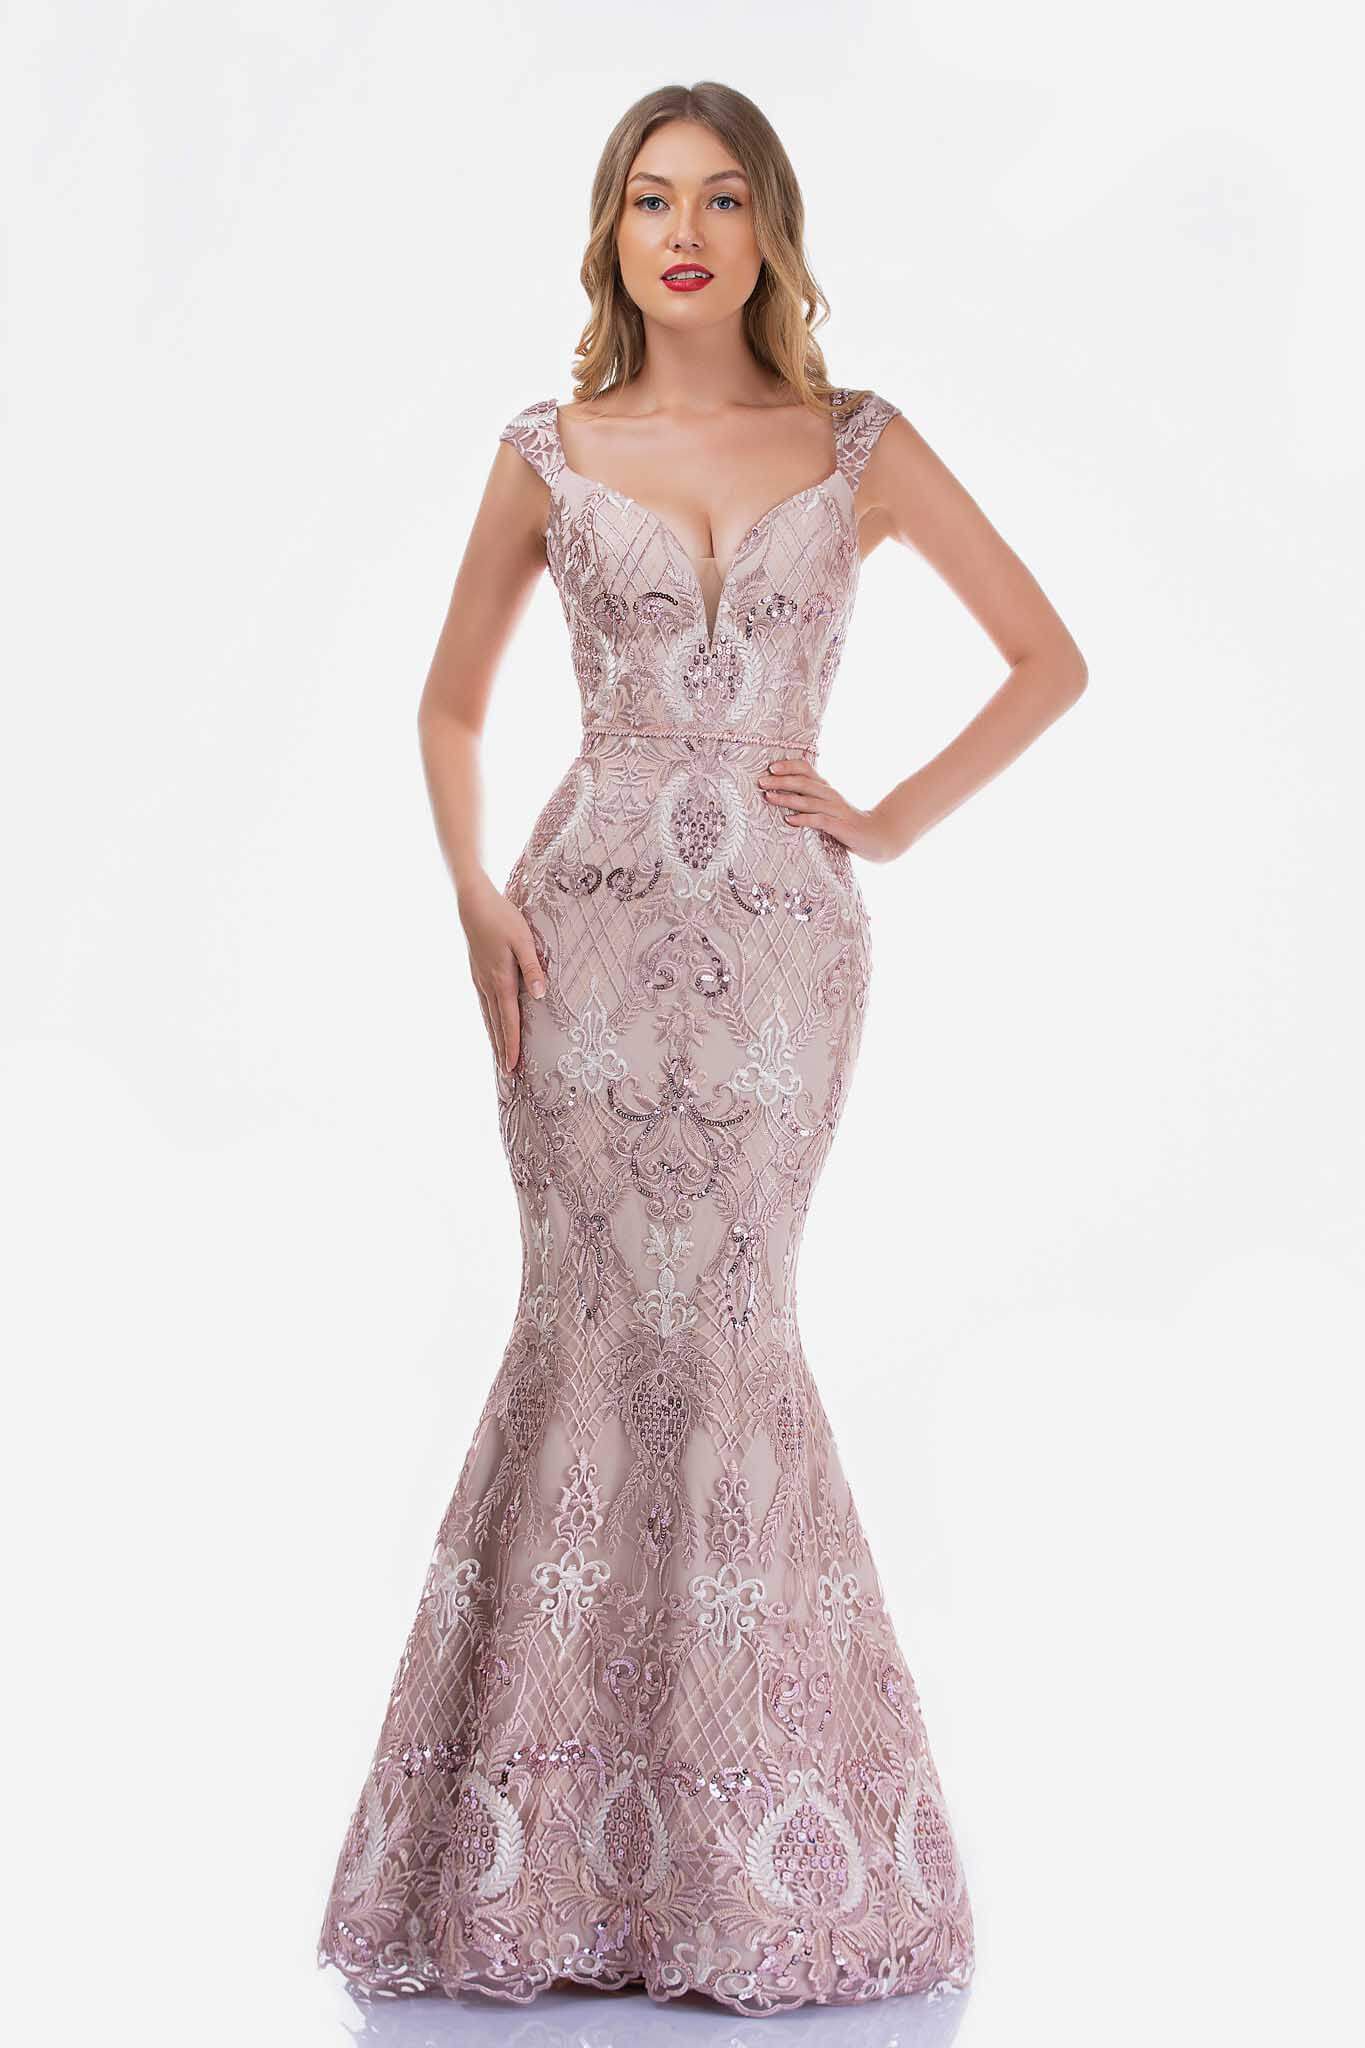 Style 2243 Nina Canacci Size 14 Prom Cap Sleeve Sequined Rose Gold Mermaid Dress on Queenly